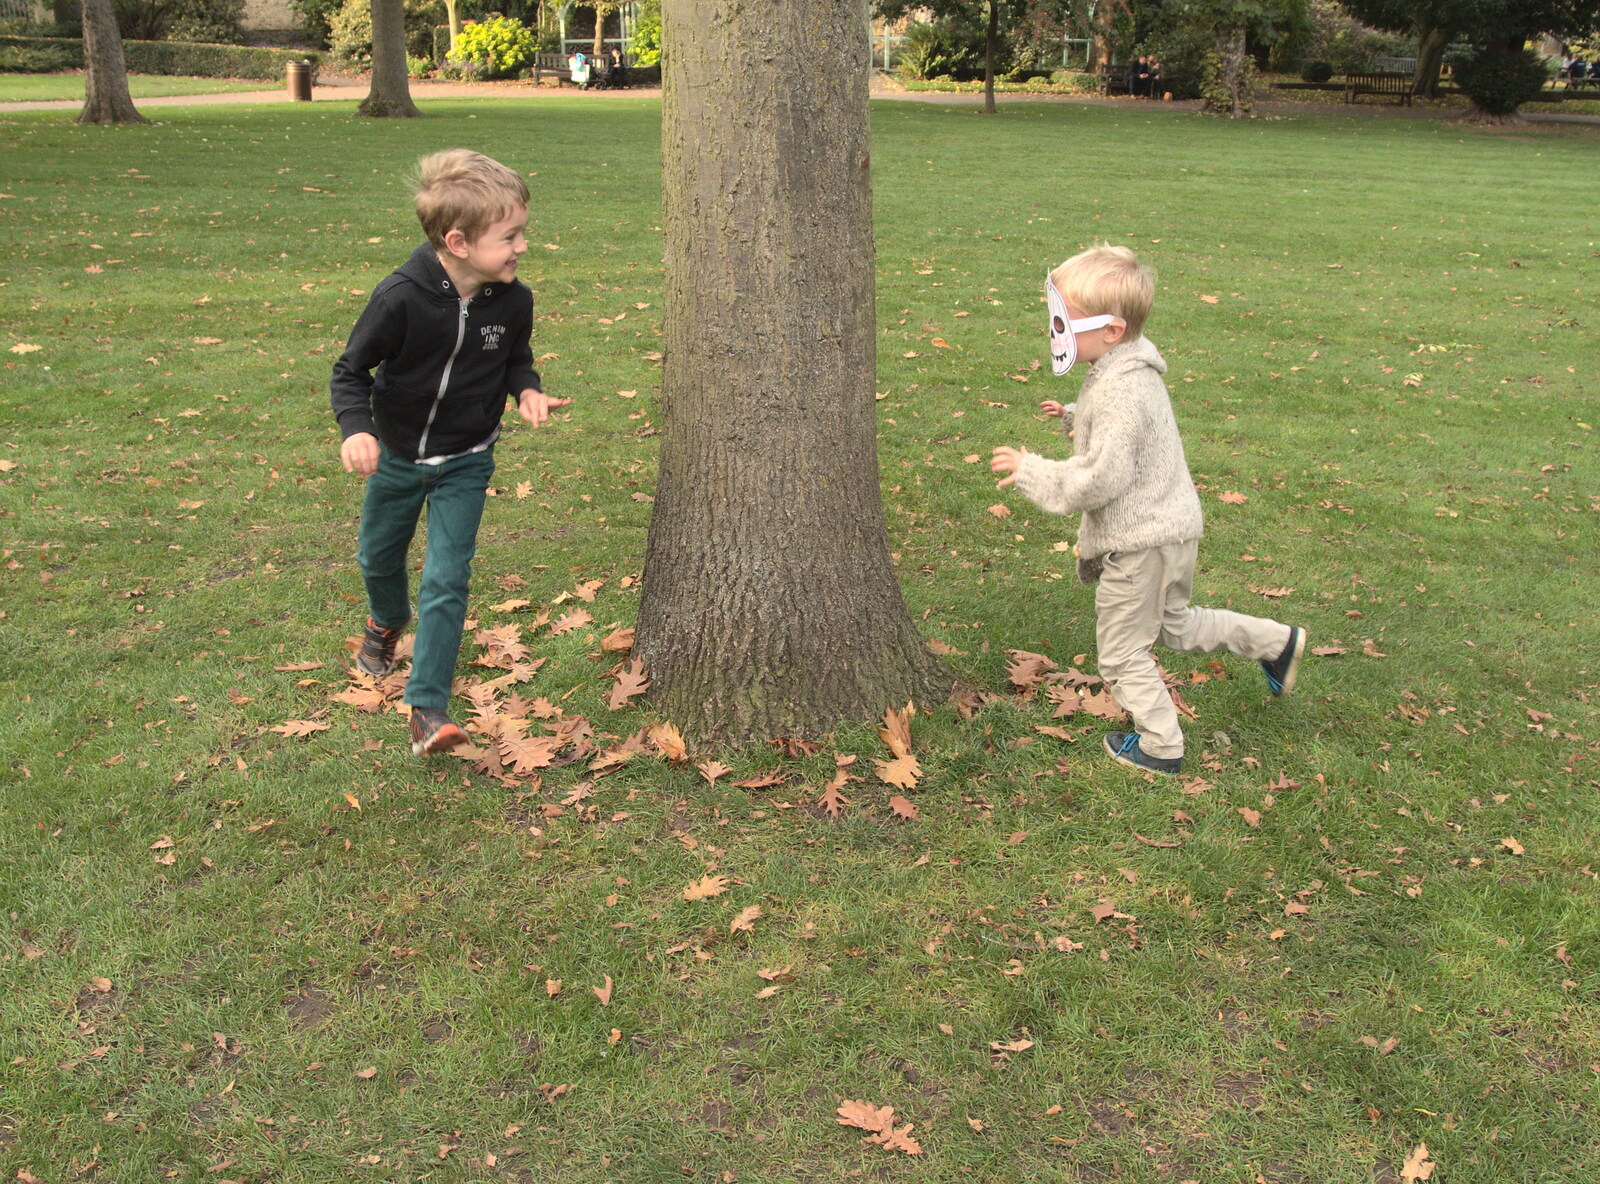 Running around a tree from Abbey Gardens in Autumn, Bury St. Edmunds, Suffolk - 27th October 2015